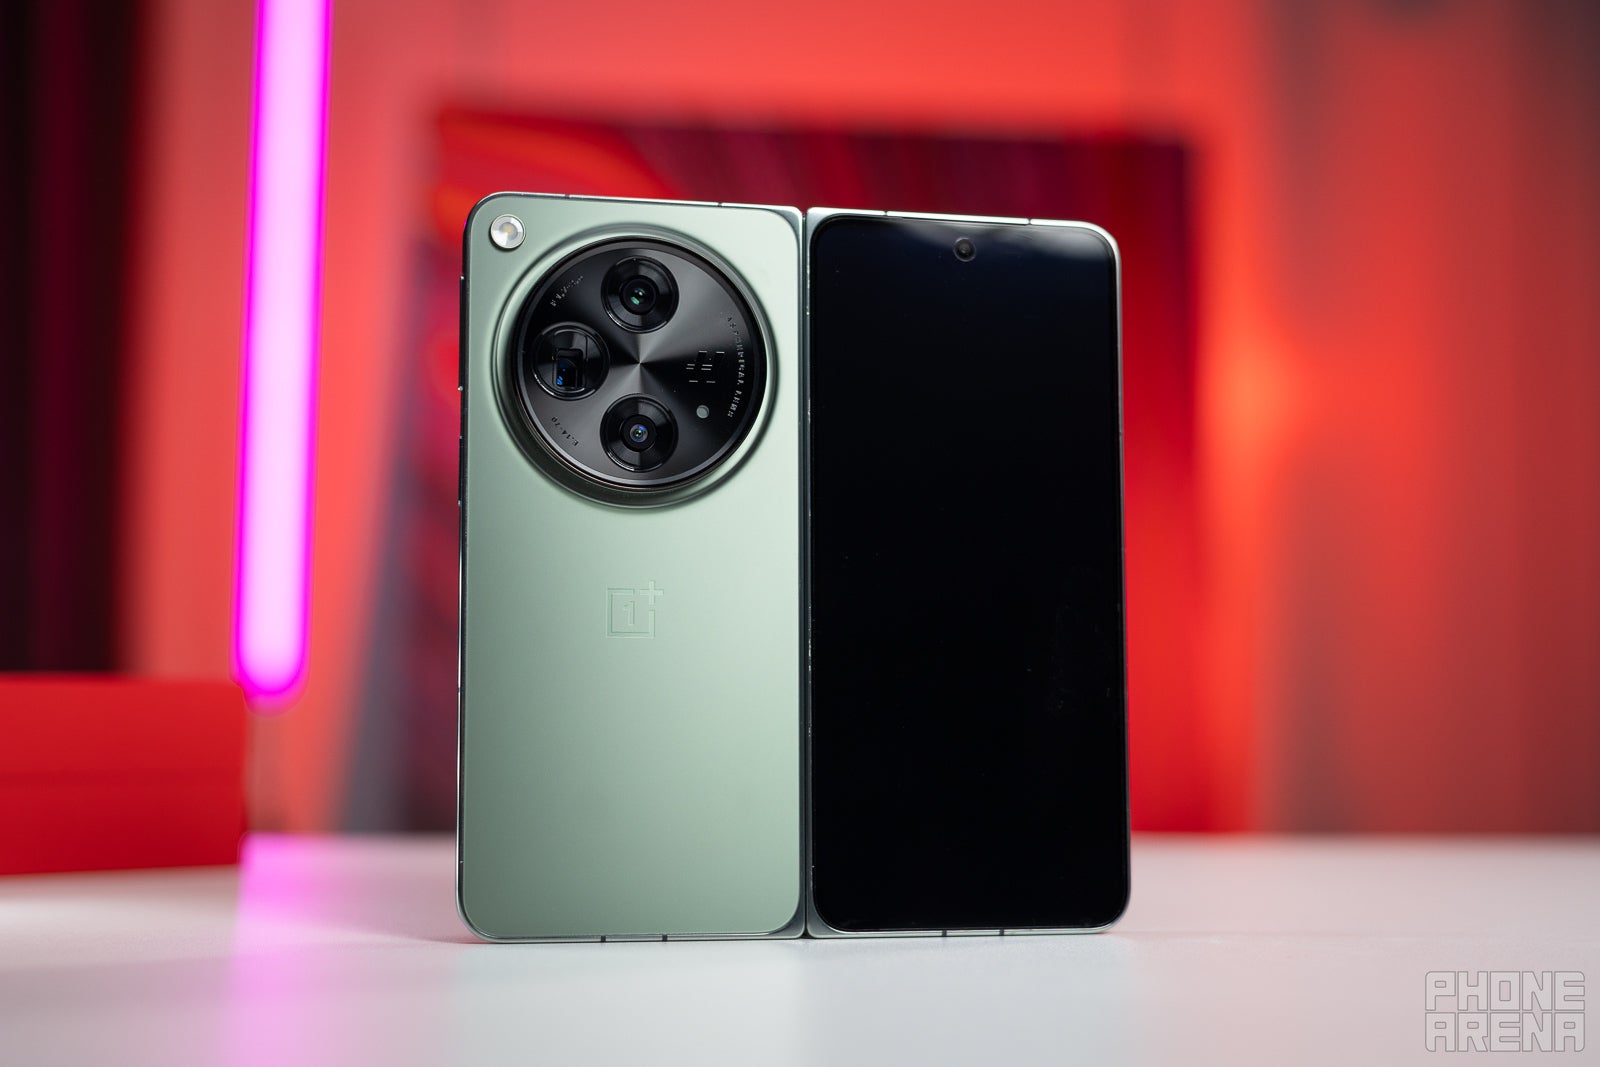 Oppo's latest flagship phone joins the exclusive 1-inch-sensor camera club